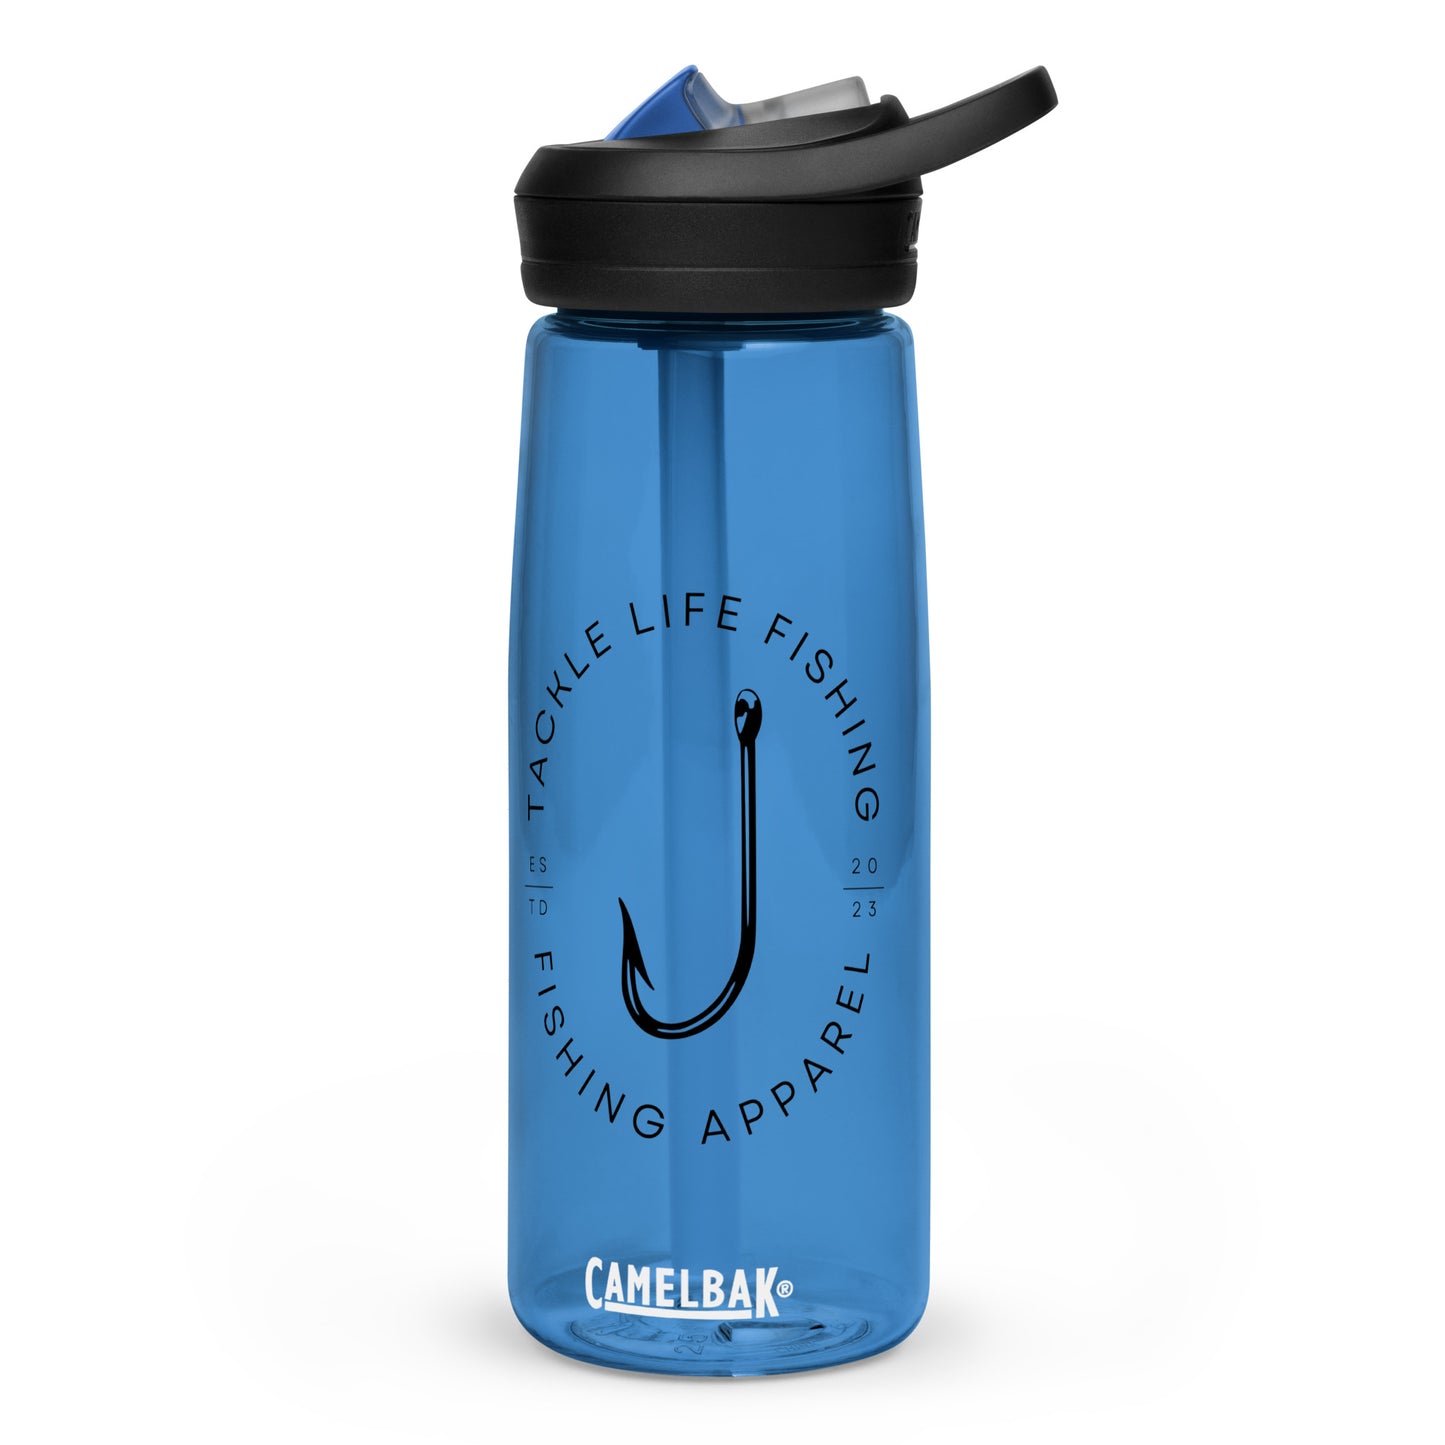 TLF Flagship Logo Recycled Plastic Water Bottle - Oxford Blue, Blue, Charcoal or Clear